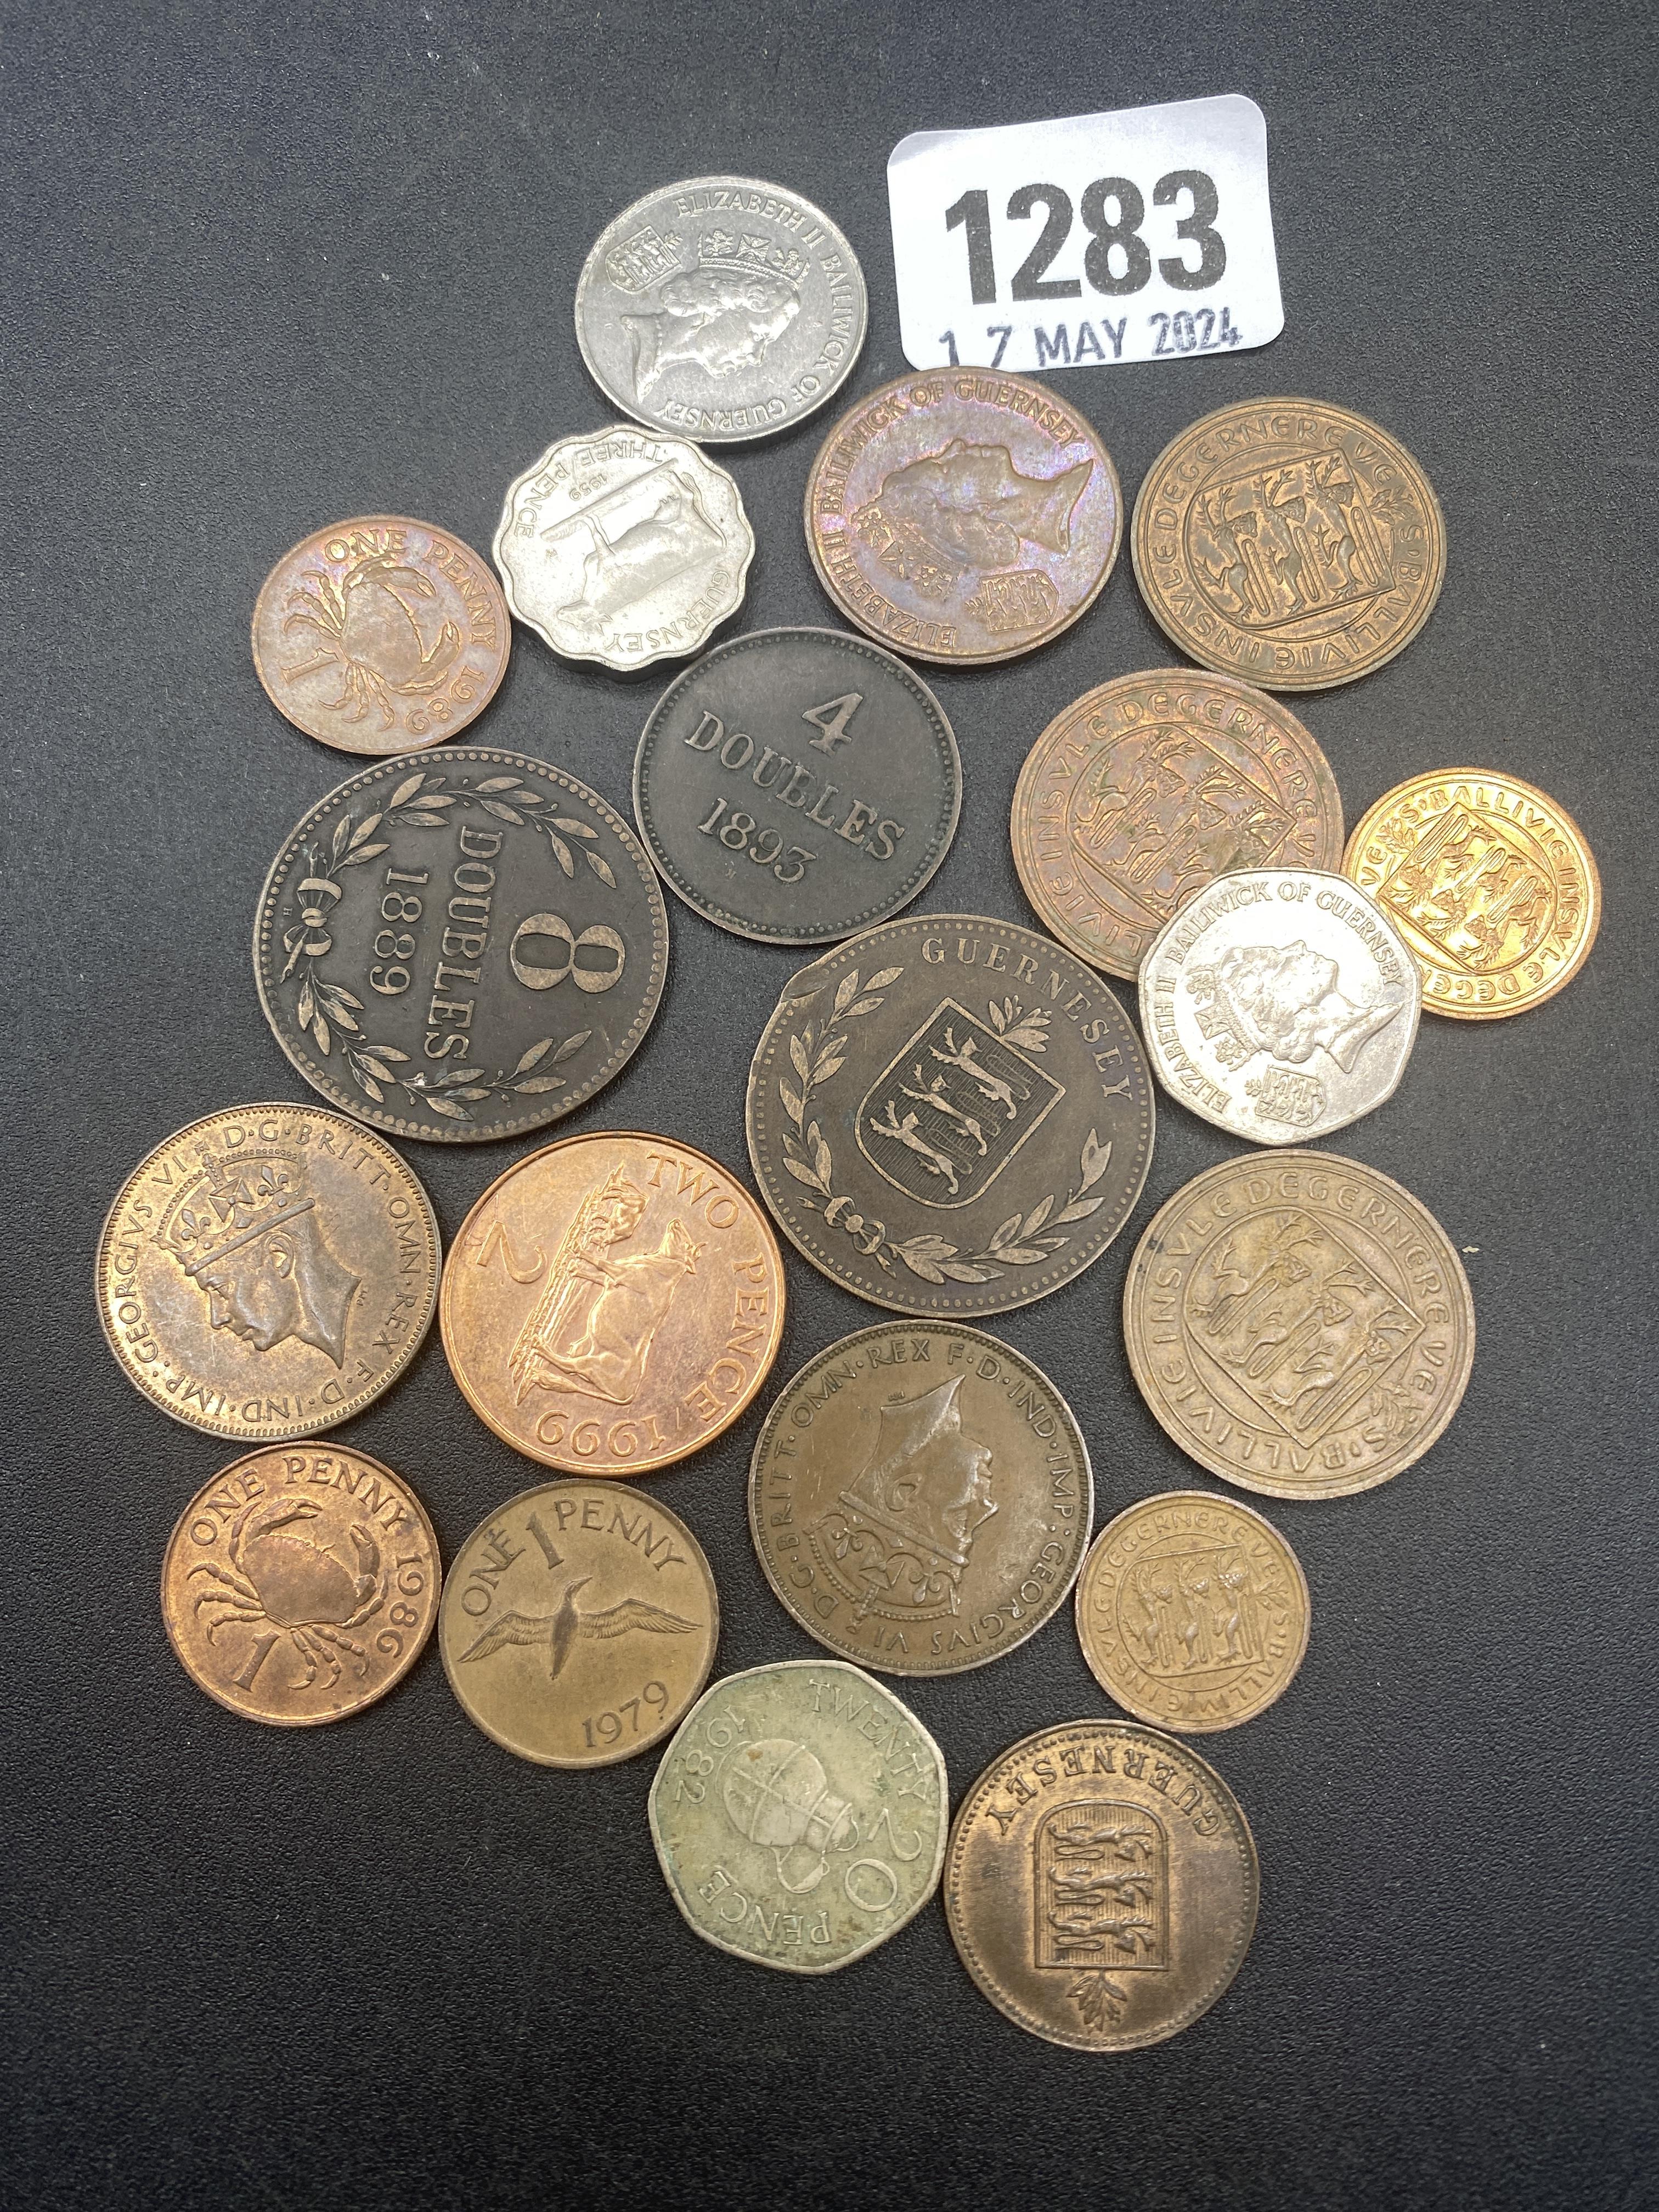 Guernsey and Jersey coins